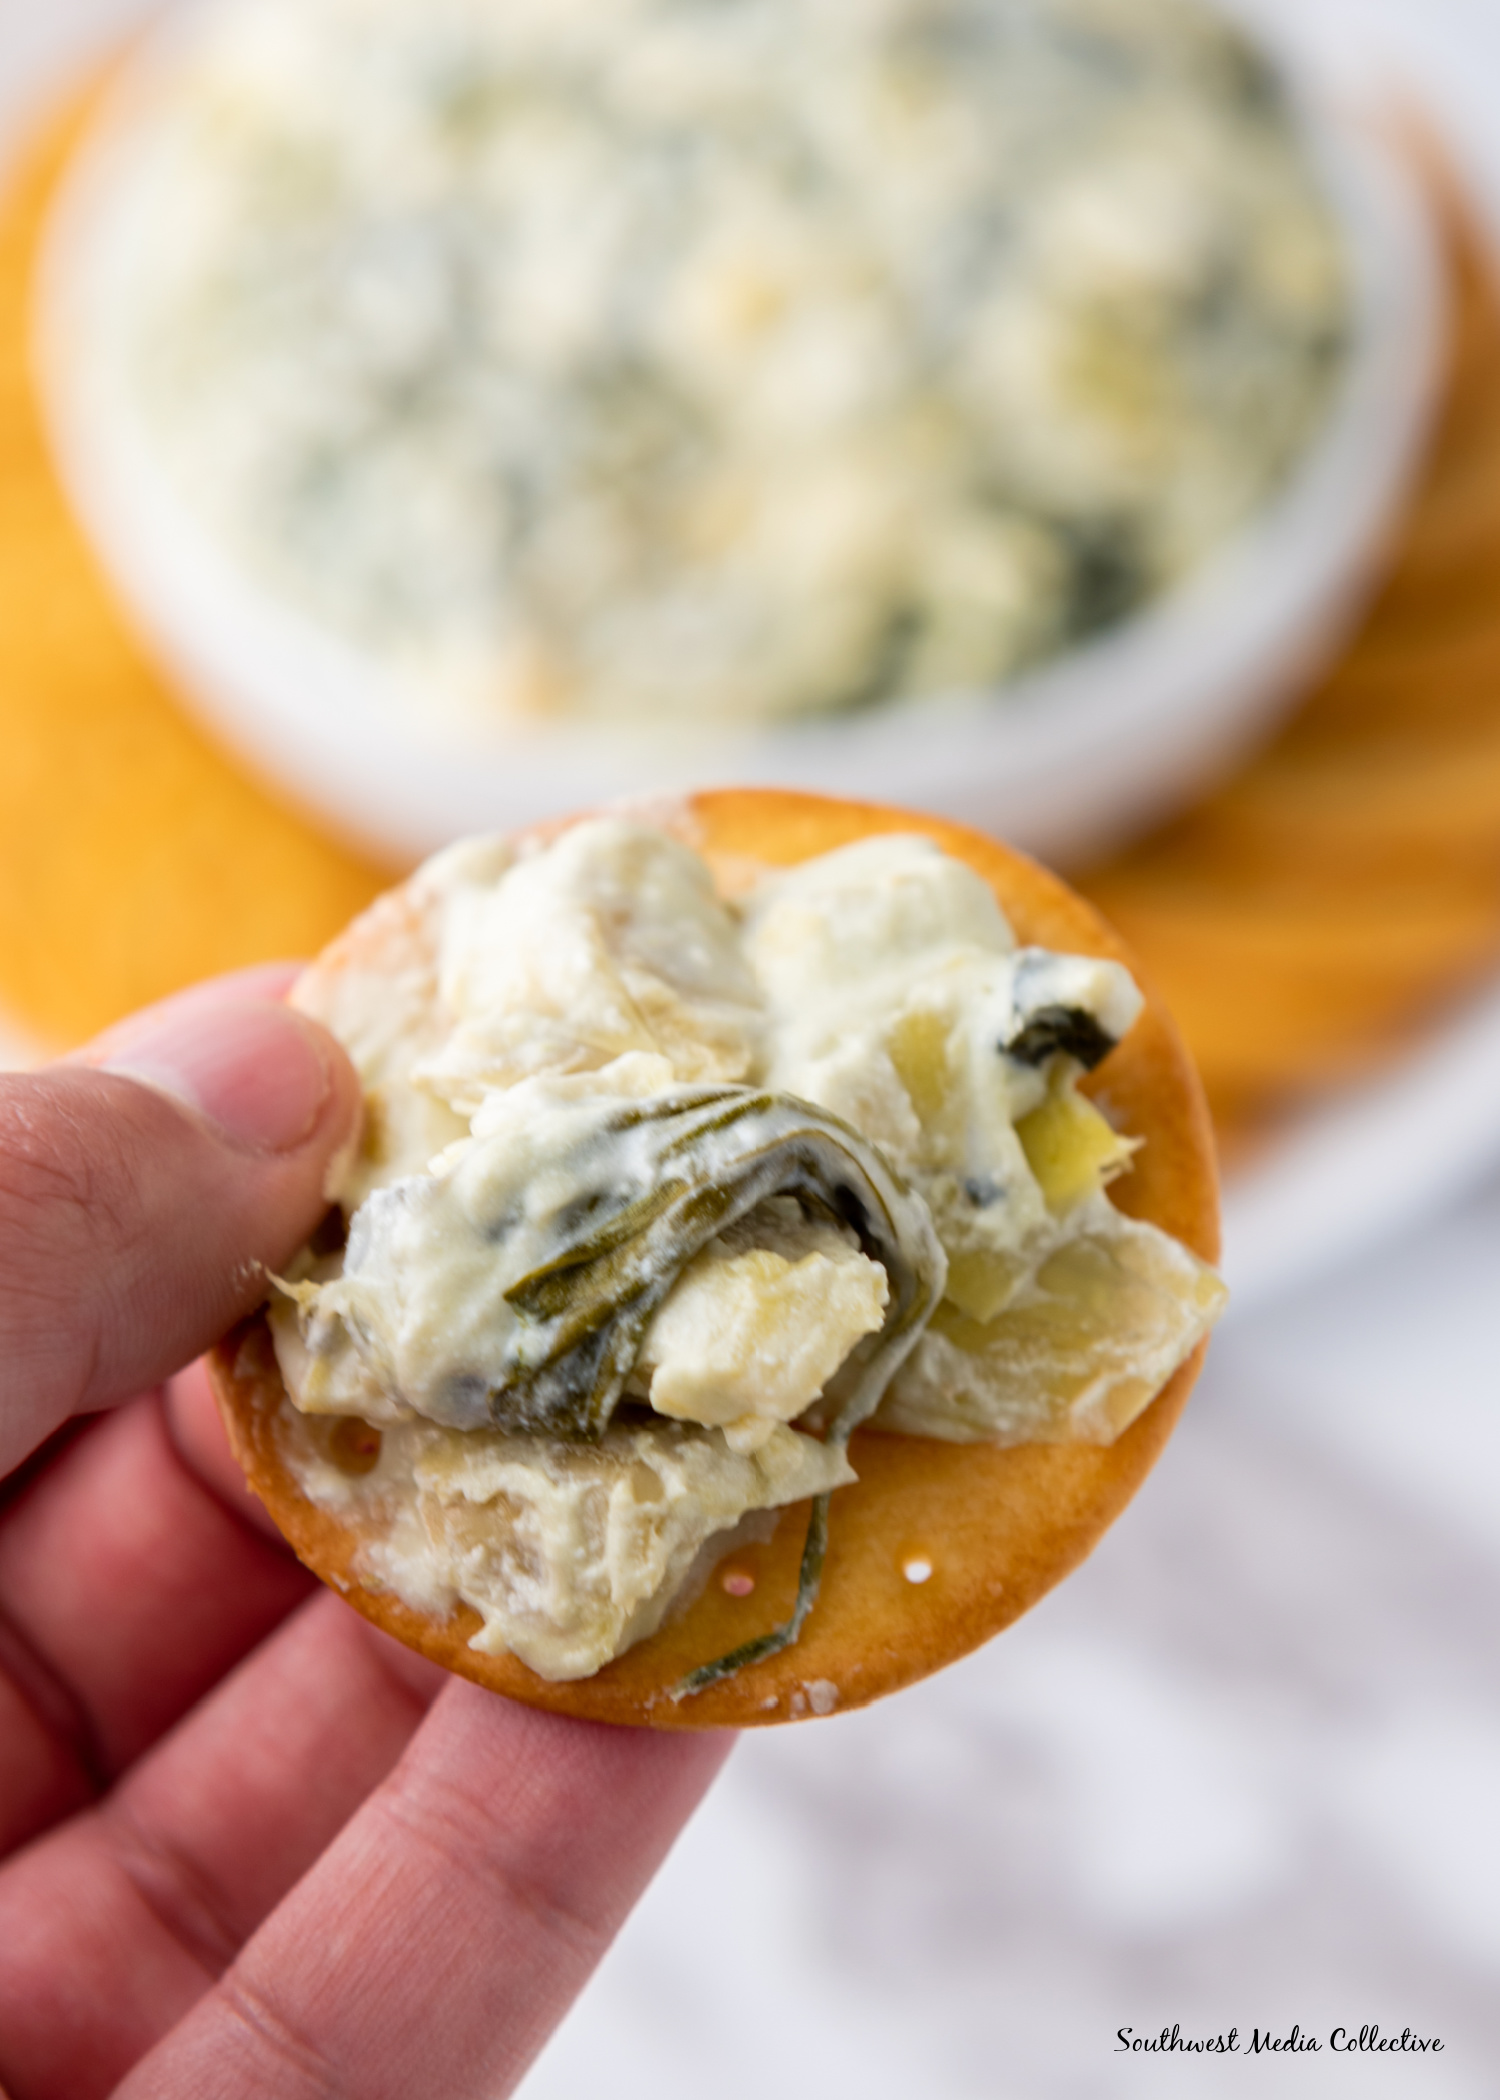 Slow Cooker Spinach Artichoke Dip is always a favorite at parties and get togethers. Make it with just a few simple ingredients in your slow cooker or crockpot for an easy way to feed a crowd.